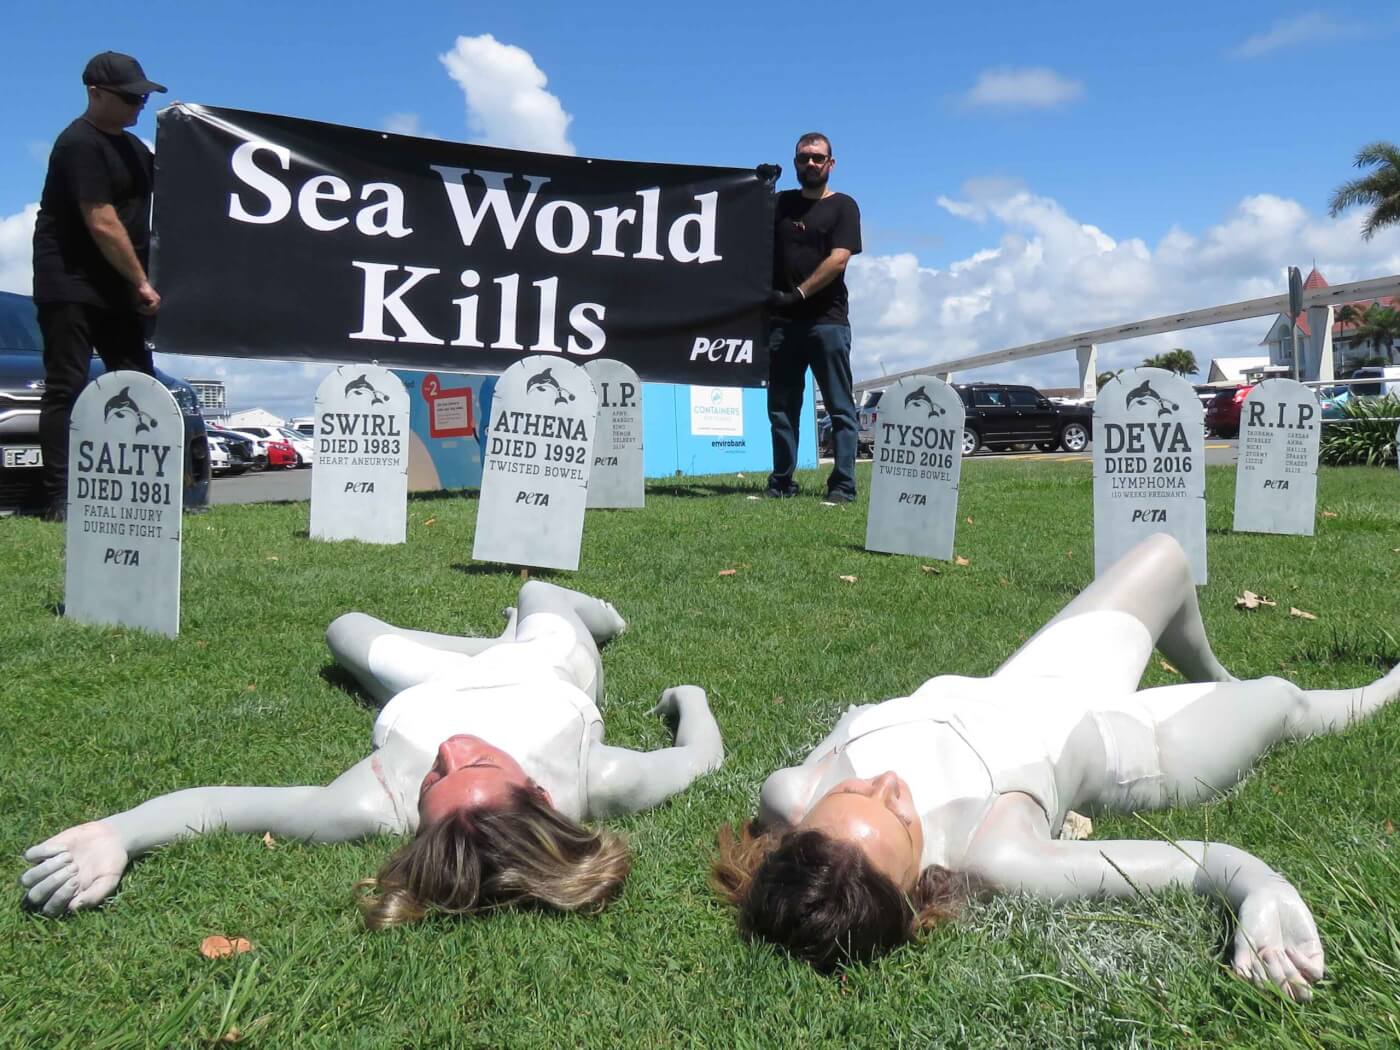 two activists painted grey and white lie under a banner which reads "Sea World Kills"